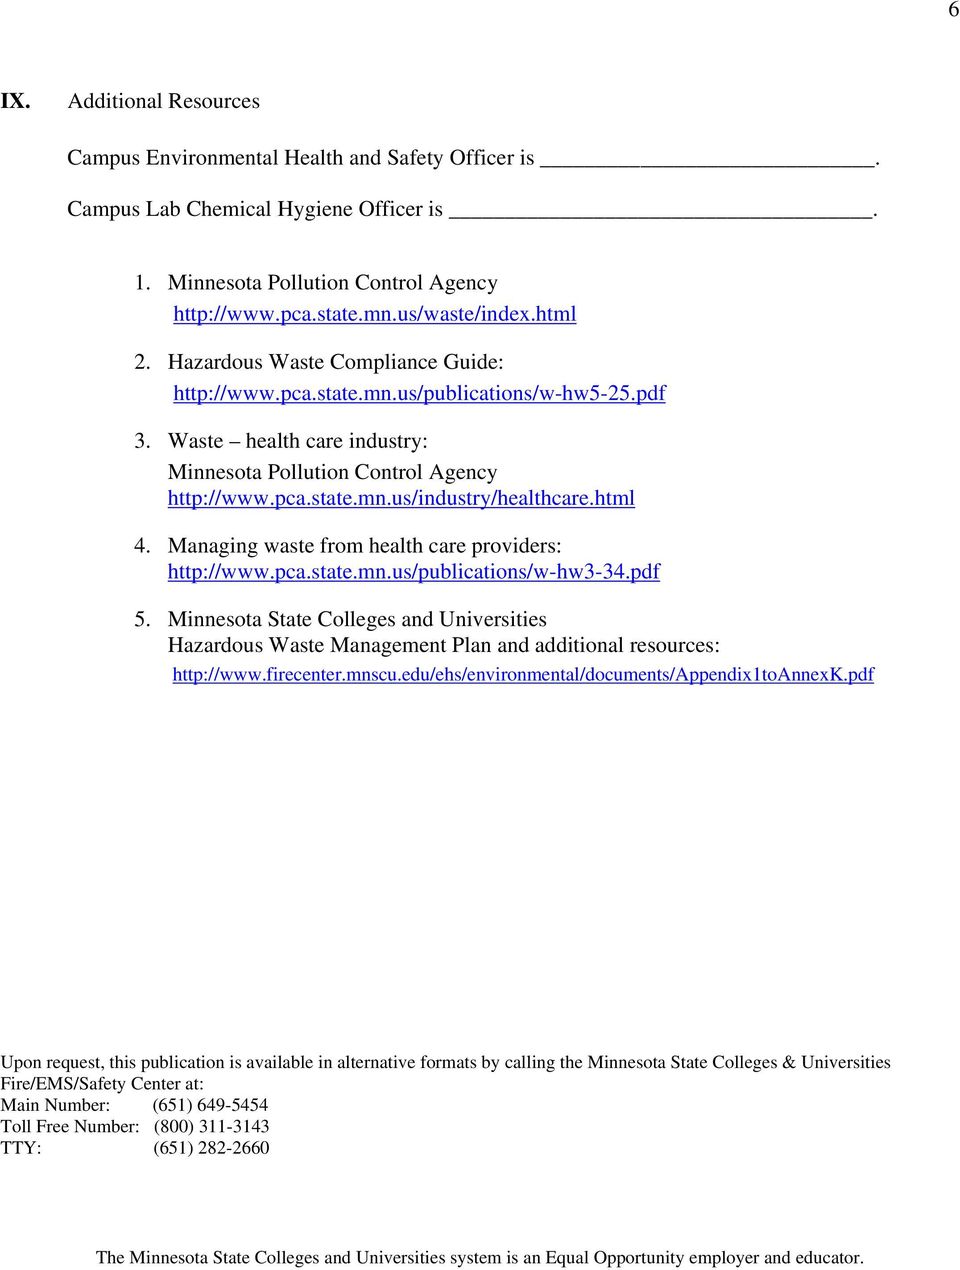 html 4. Managing waste from health care providers: http://www.pca.state.mn.us/publications/w-hw3-34.pdf 5.